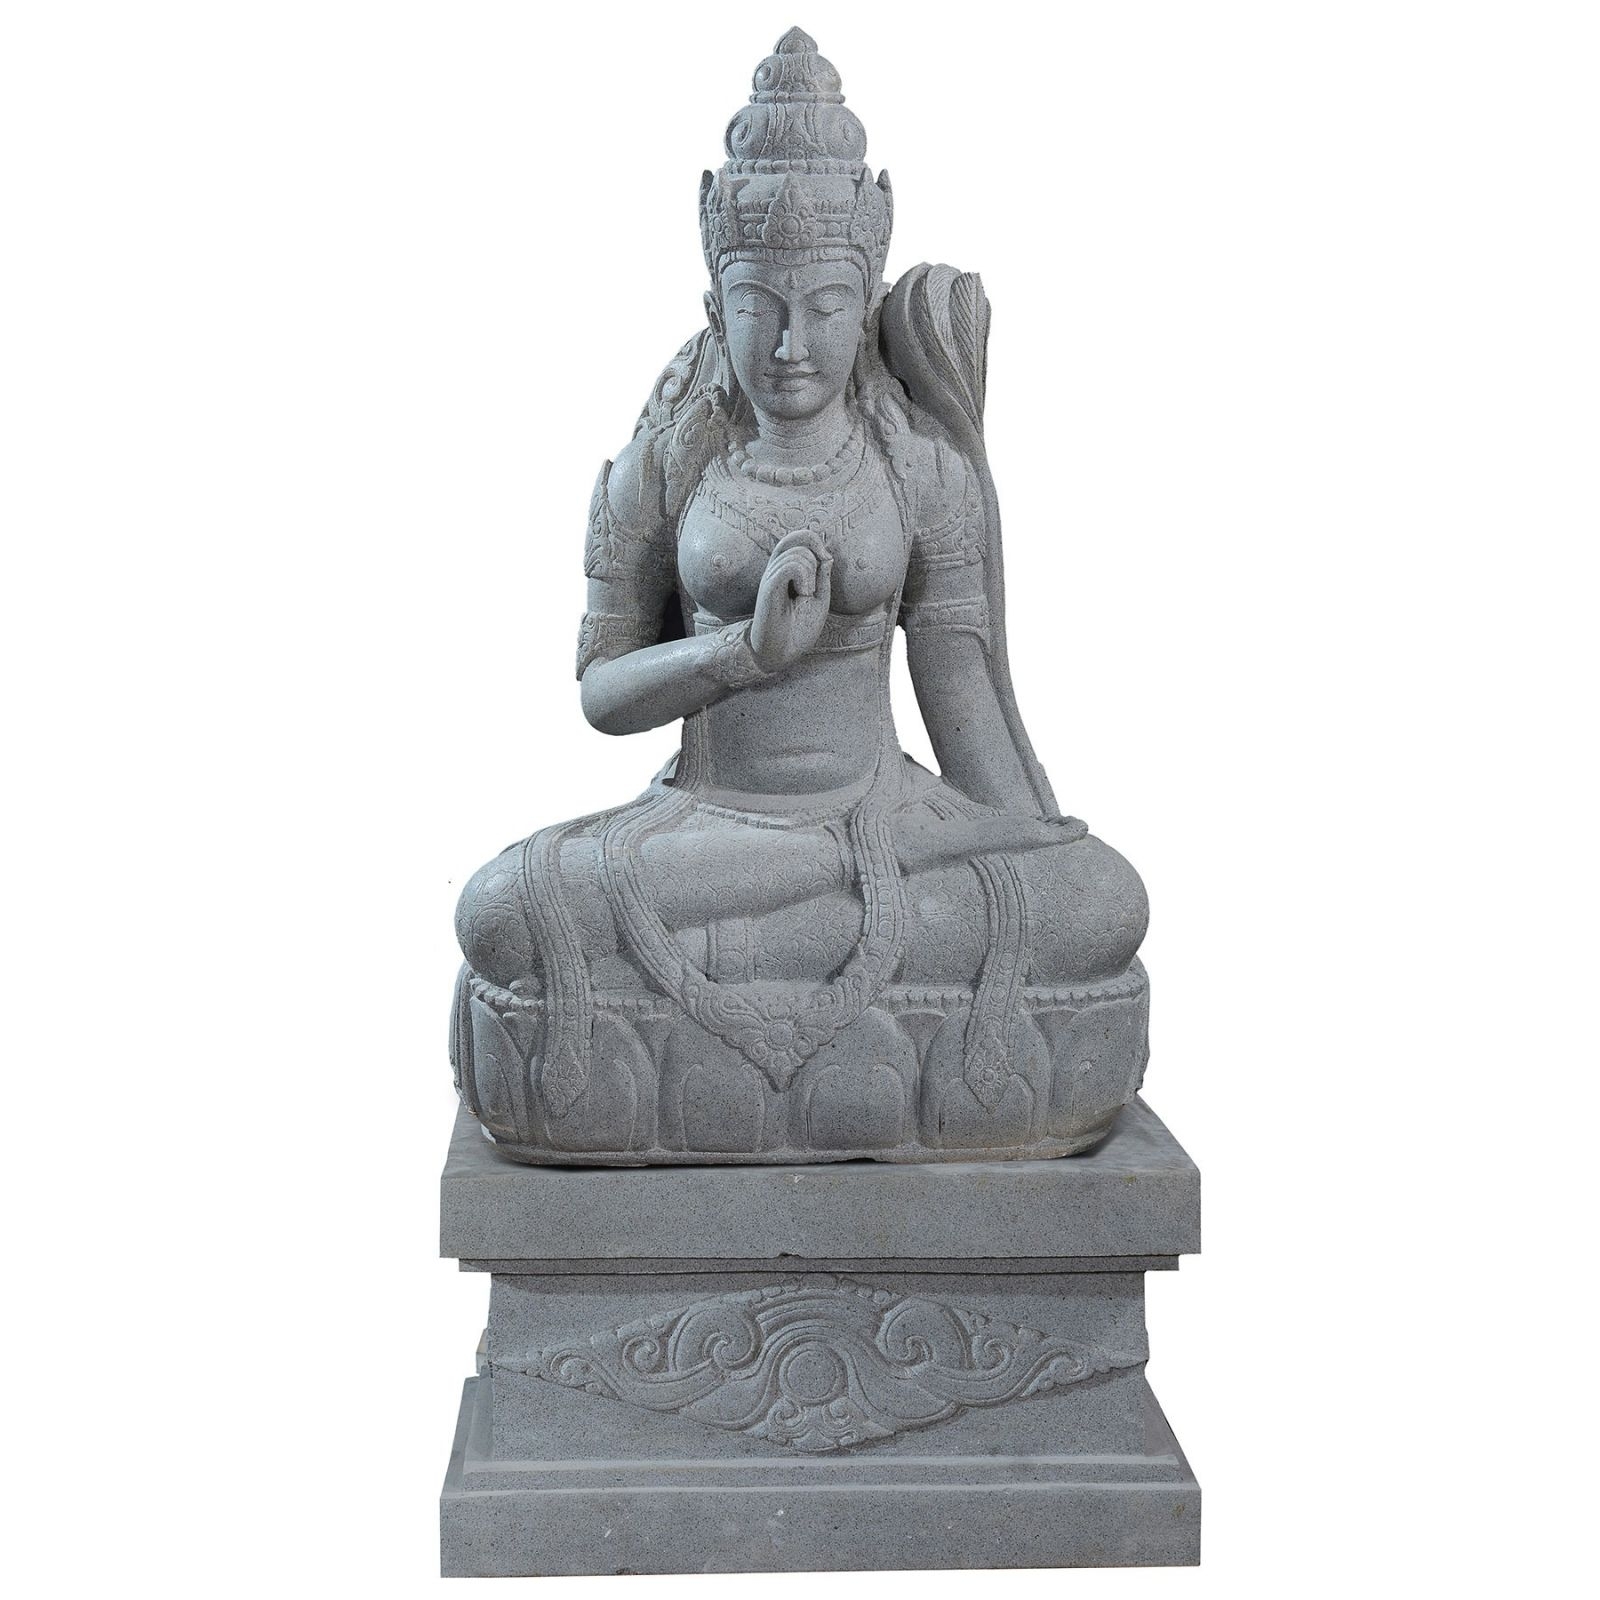 Large garden Stone statue of sitting Dewi Sri – Goddess of the earth